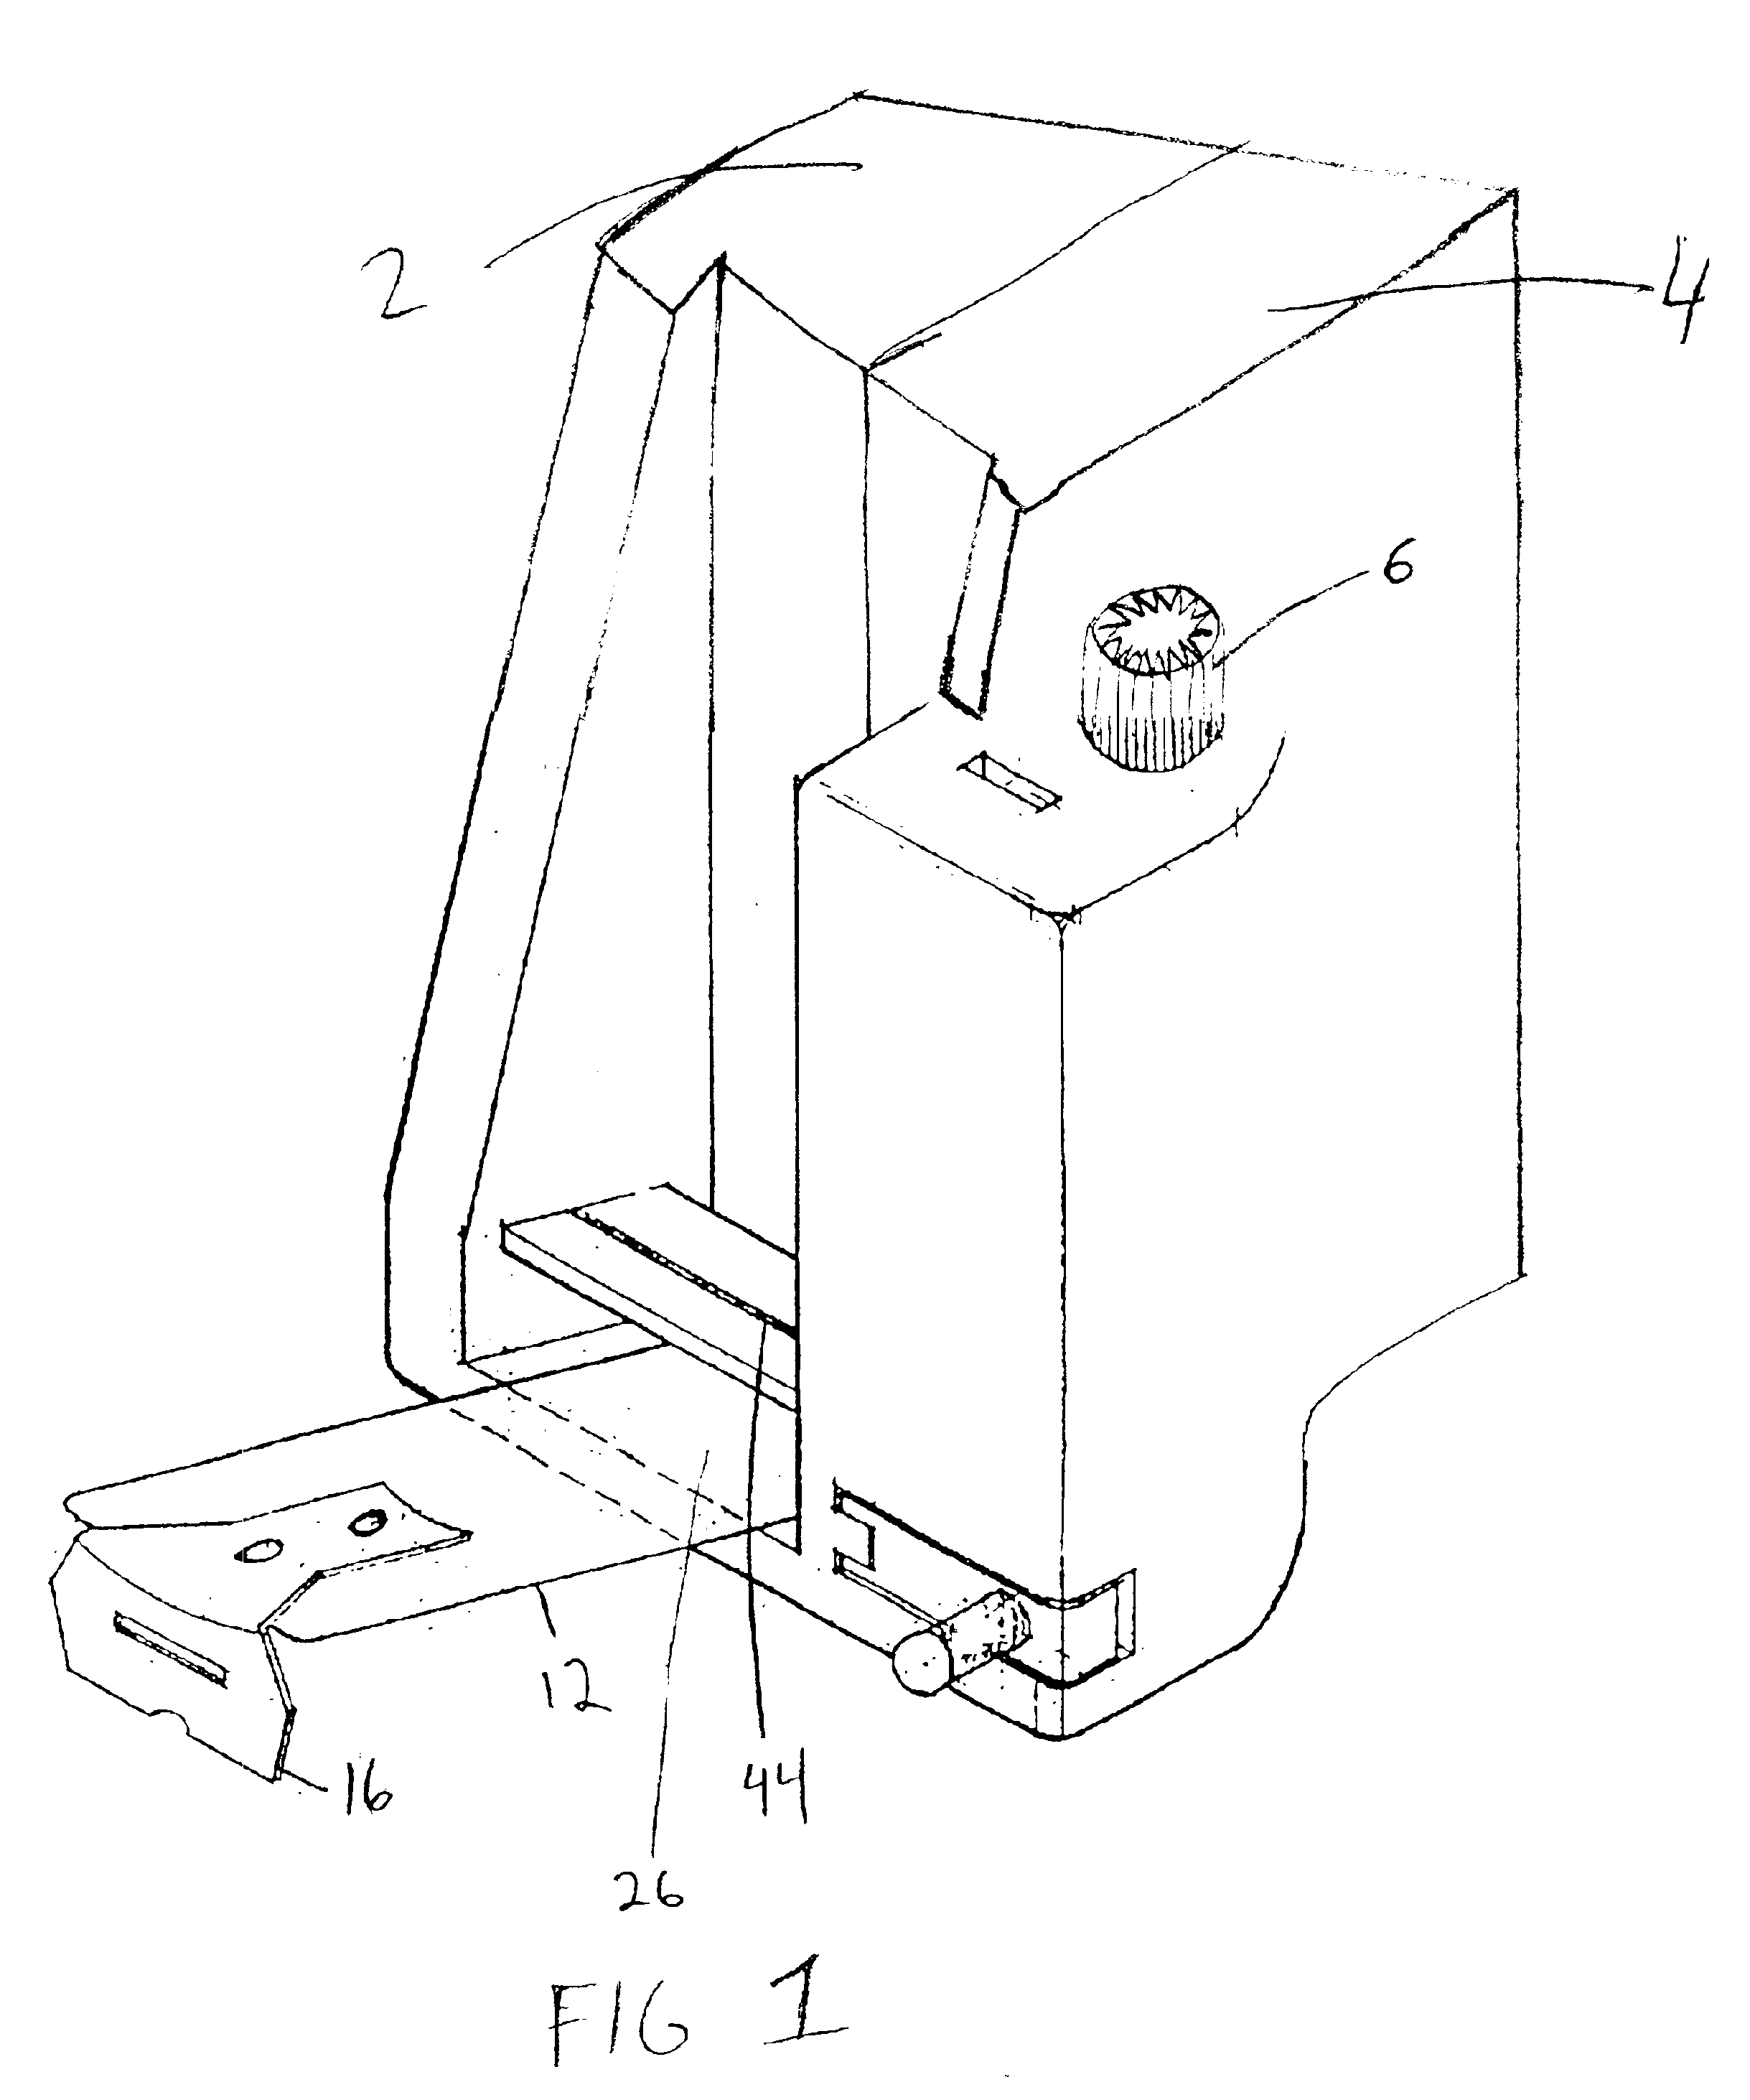 Device and method for making precise measurements and cuts with a measuring tape